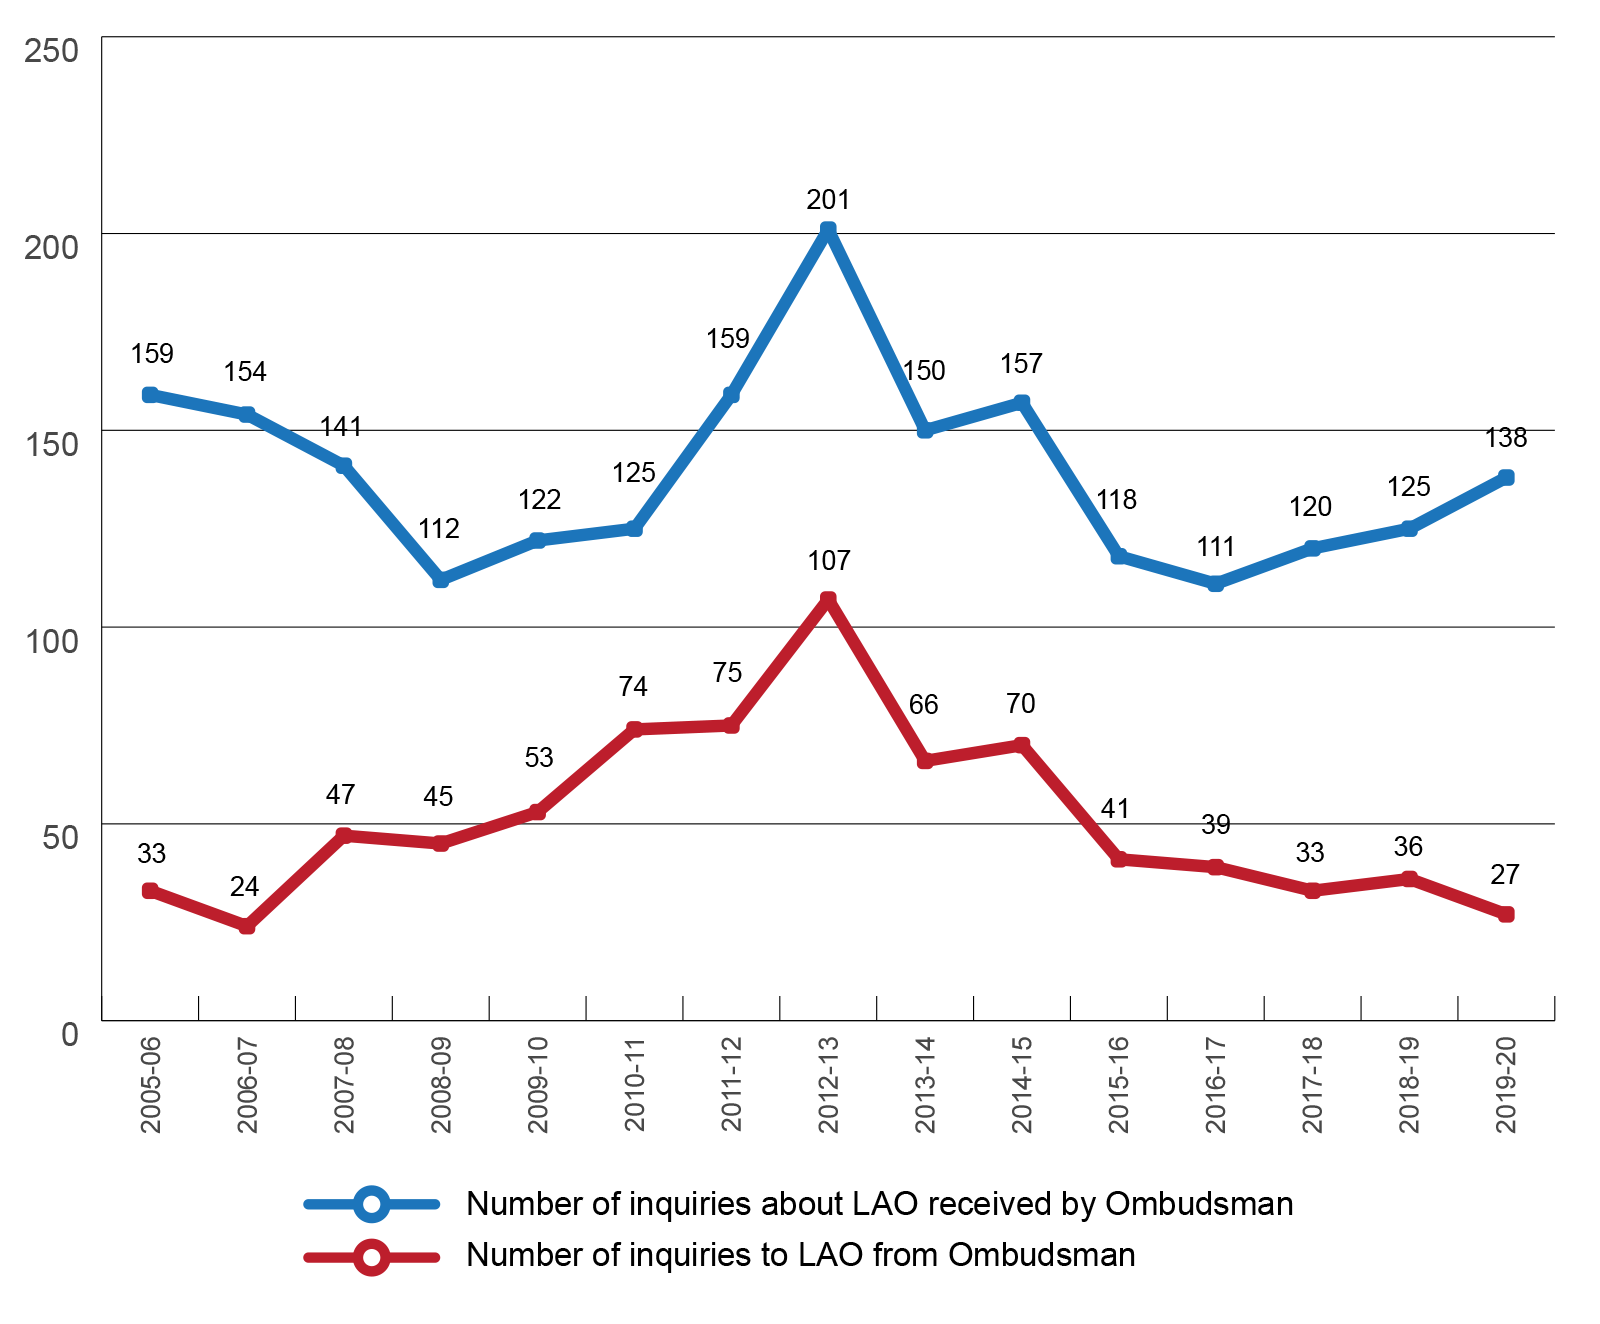 Number of LAO-related inquiries the Ombudsman received between 2005 and 2020, compared to the number of inquiries the Ombudsman then made to LAO. 

		In 2019-20, the Ombudsman received 138 LAO-related inquiries and made 27 inquiries to LAO.

		In 2018-19, this number was 125 versus 36.

		In 2017-18, 120 versus 33.

		In 2016-17, 111 versus 39.

		In 2015-16, 118 versus 41.

		In 2014-15, 157 versus 70.

		In 2013-14, 150 versus 66.

		In 2012-13, 201 versus 107.

		In 2011-12, 159 versus 75.

		In 2010-11, 125 versus 74.

		In 2009-10 122 versus 53.

		In 2008-09, 112 versus 45.

		In 2007-08, 141 versus 47.

		In 2006-07, 154 versus 24.

		In 2005-06, 159 versus 33
		